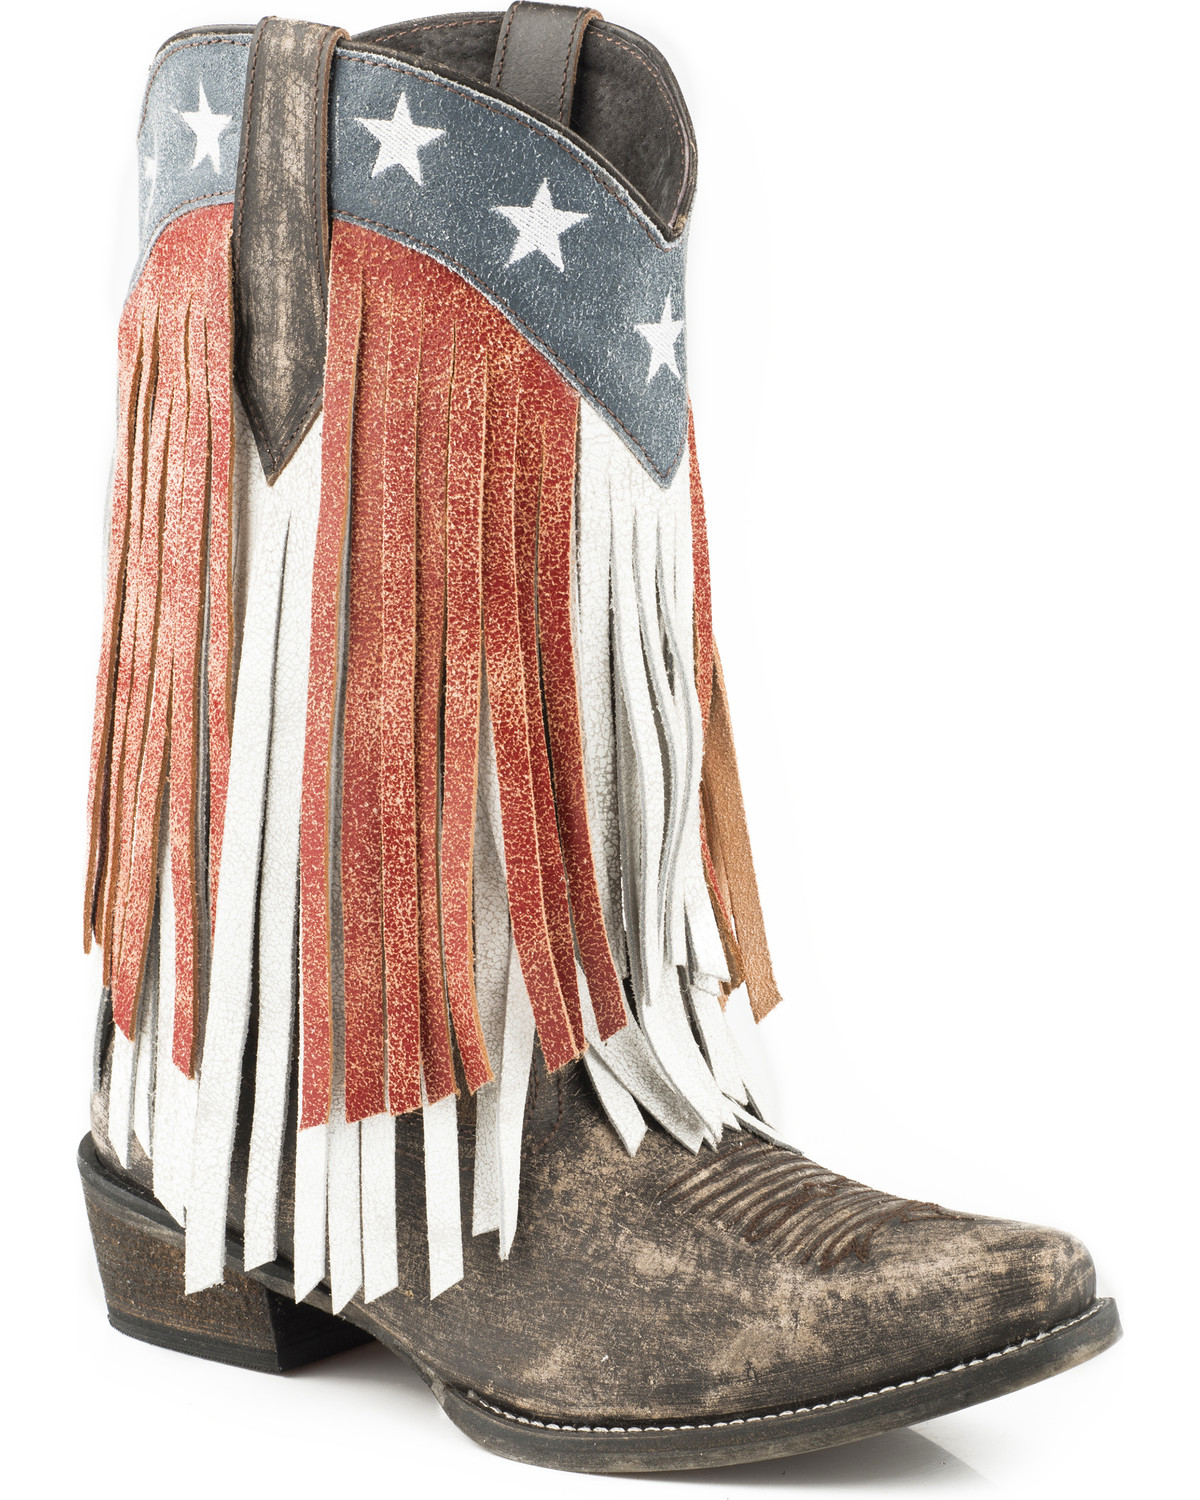 cowboy boots with fringe